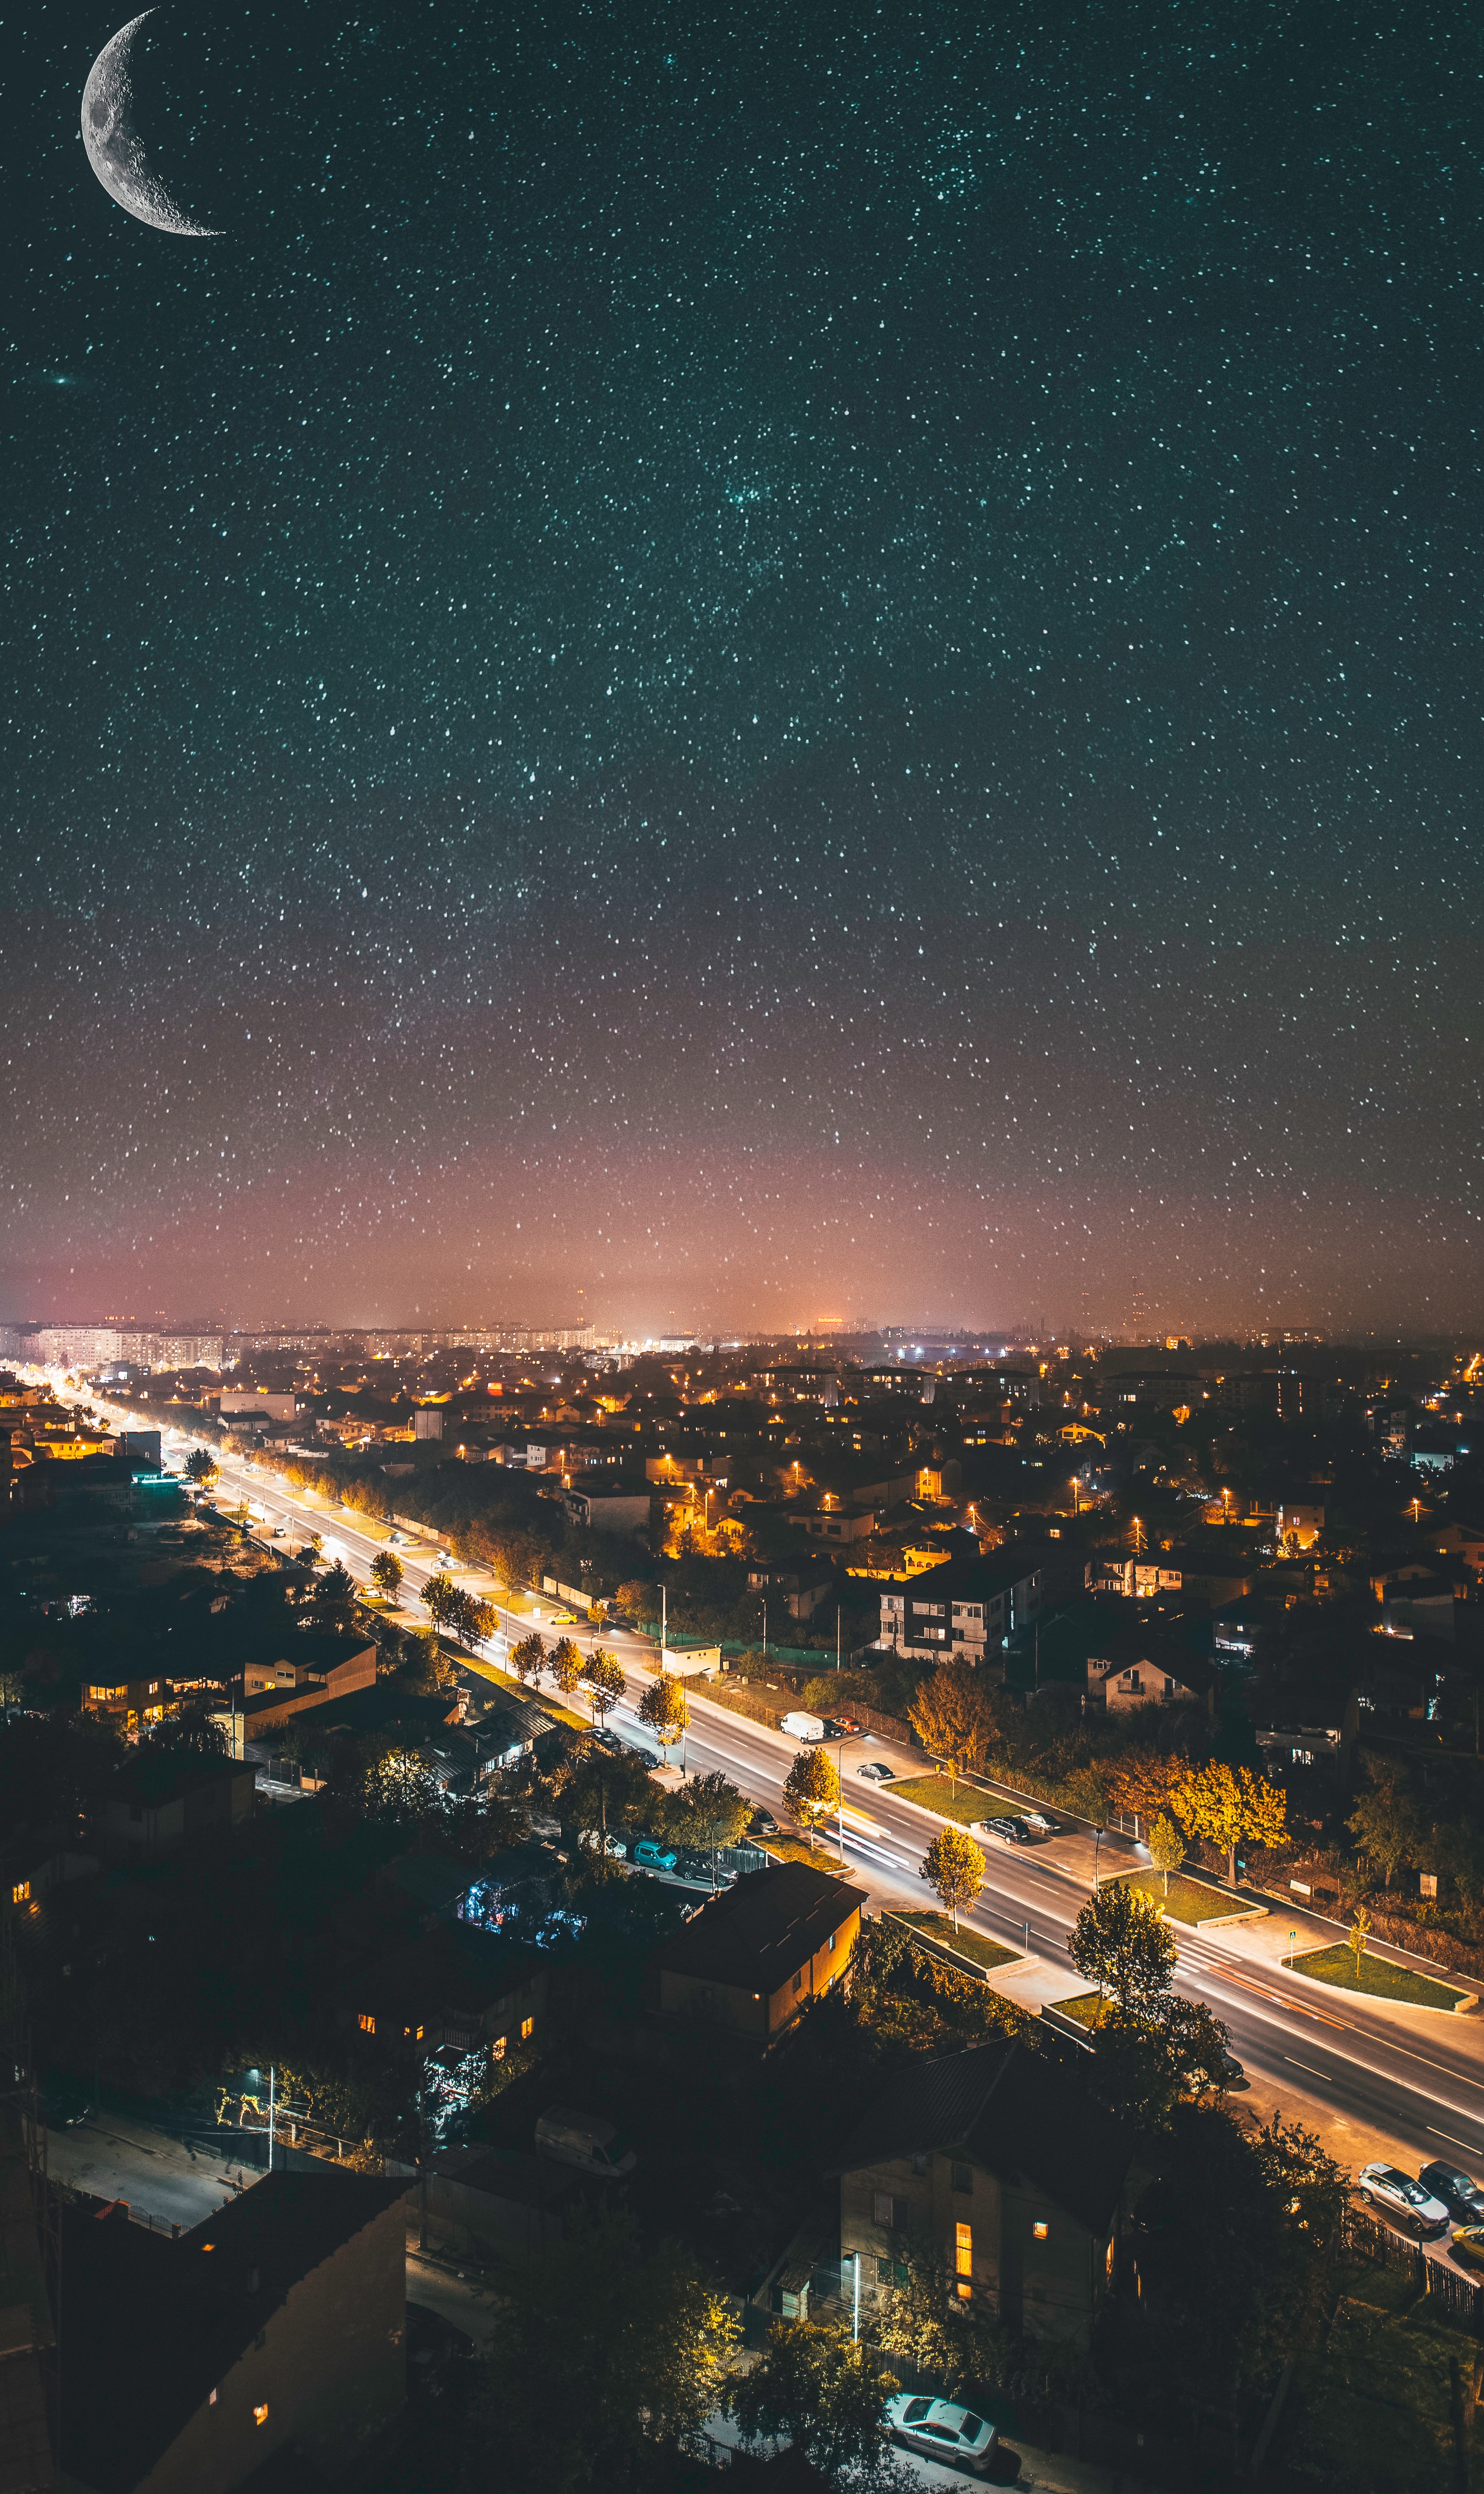 night, city, view from above, dark, starry sky, urban landscape, cityscape